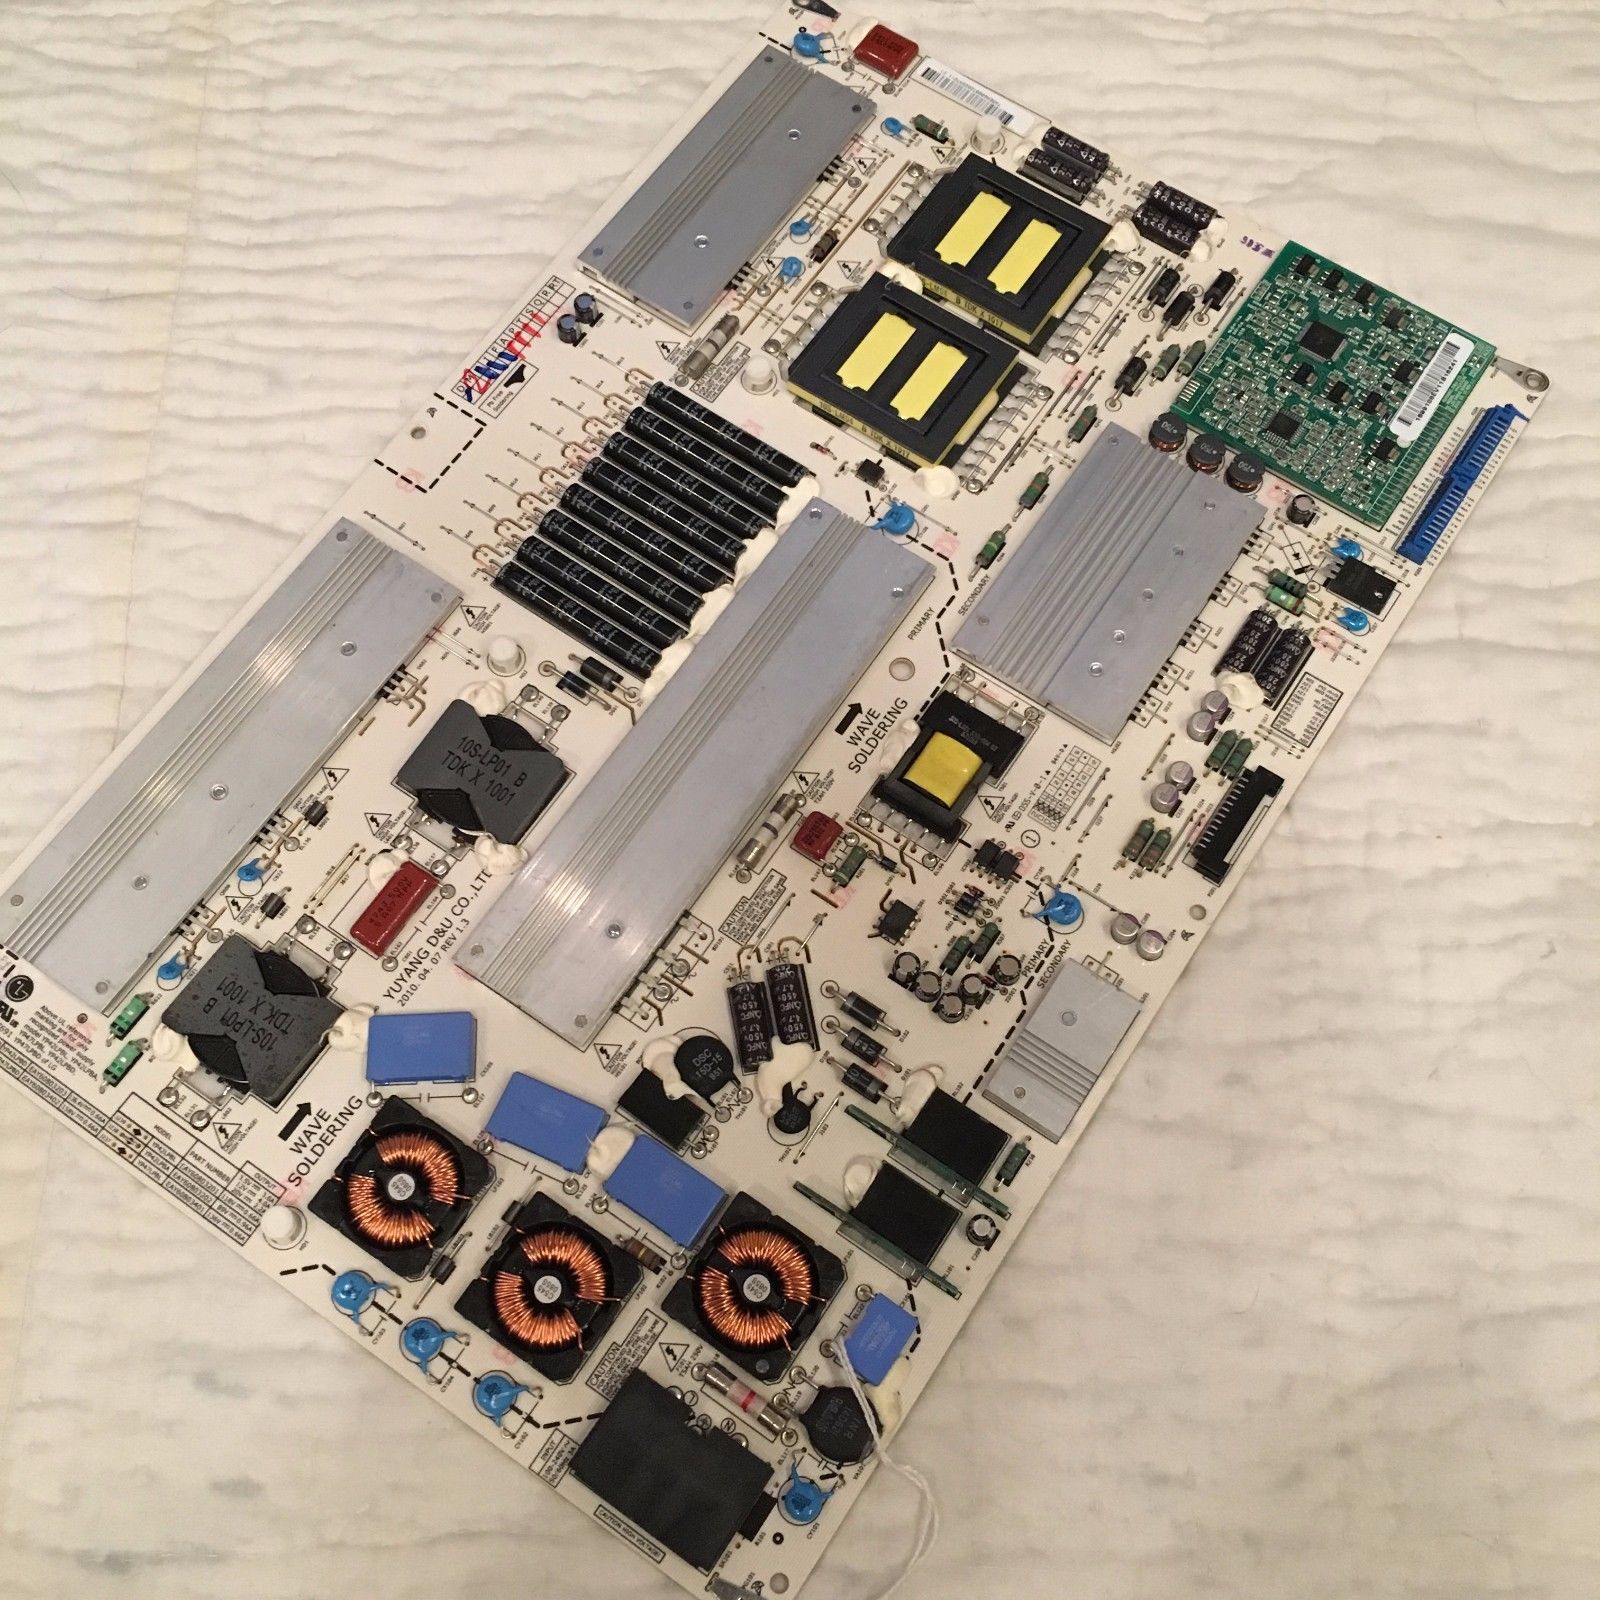 LG EAY60803202 POWER SUPPLY BOARD FOR 42LE5400 AND OTHER MODELS